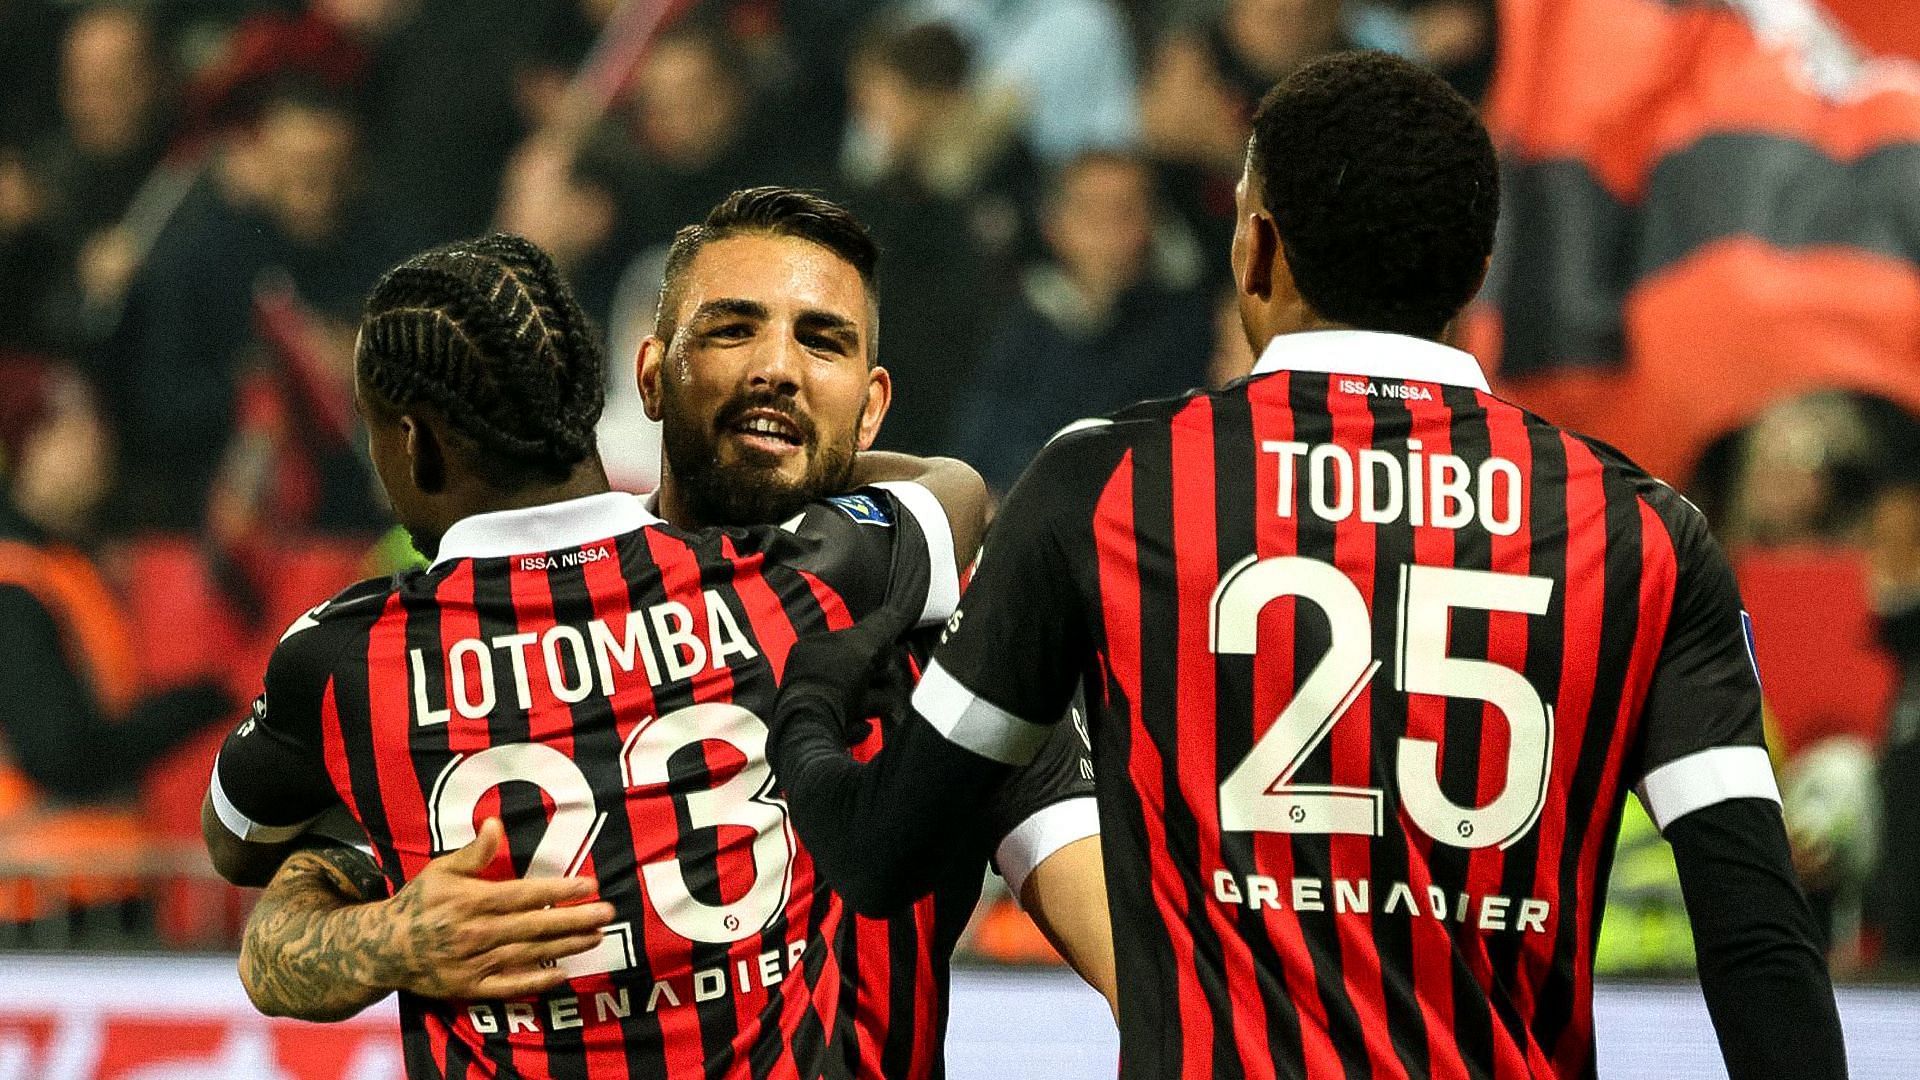 Can Nice follow their huge win over Paris St. Germain with another victory this weekend?